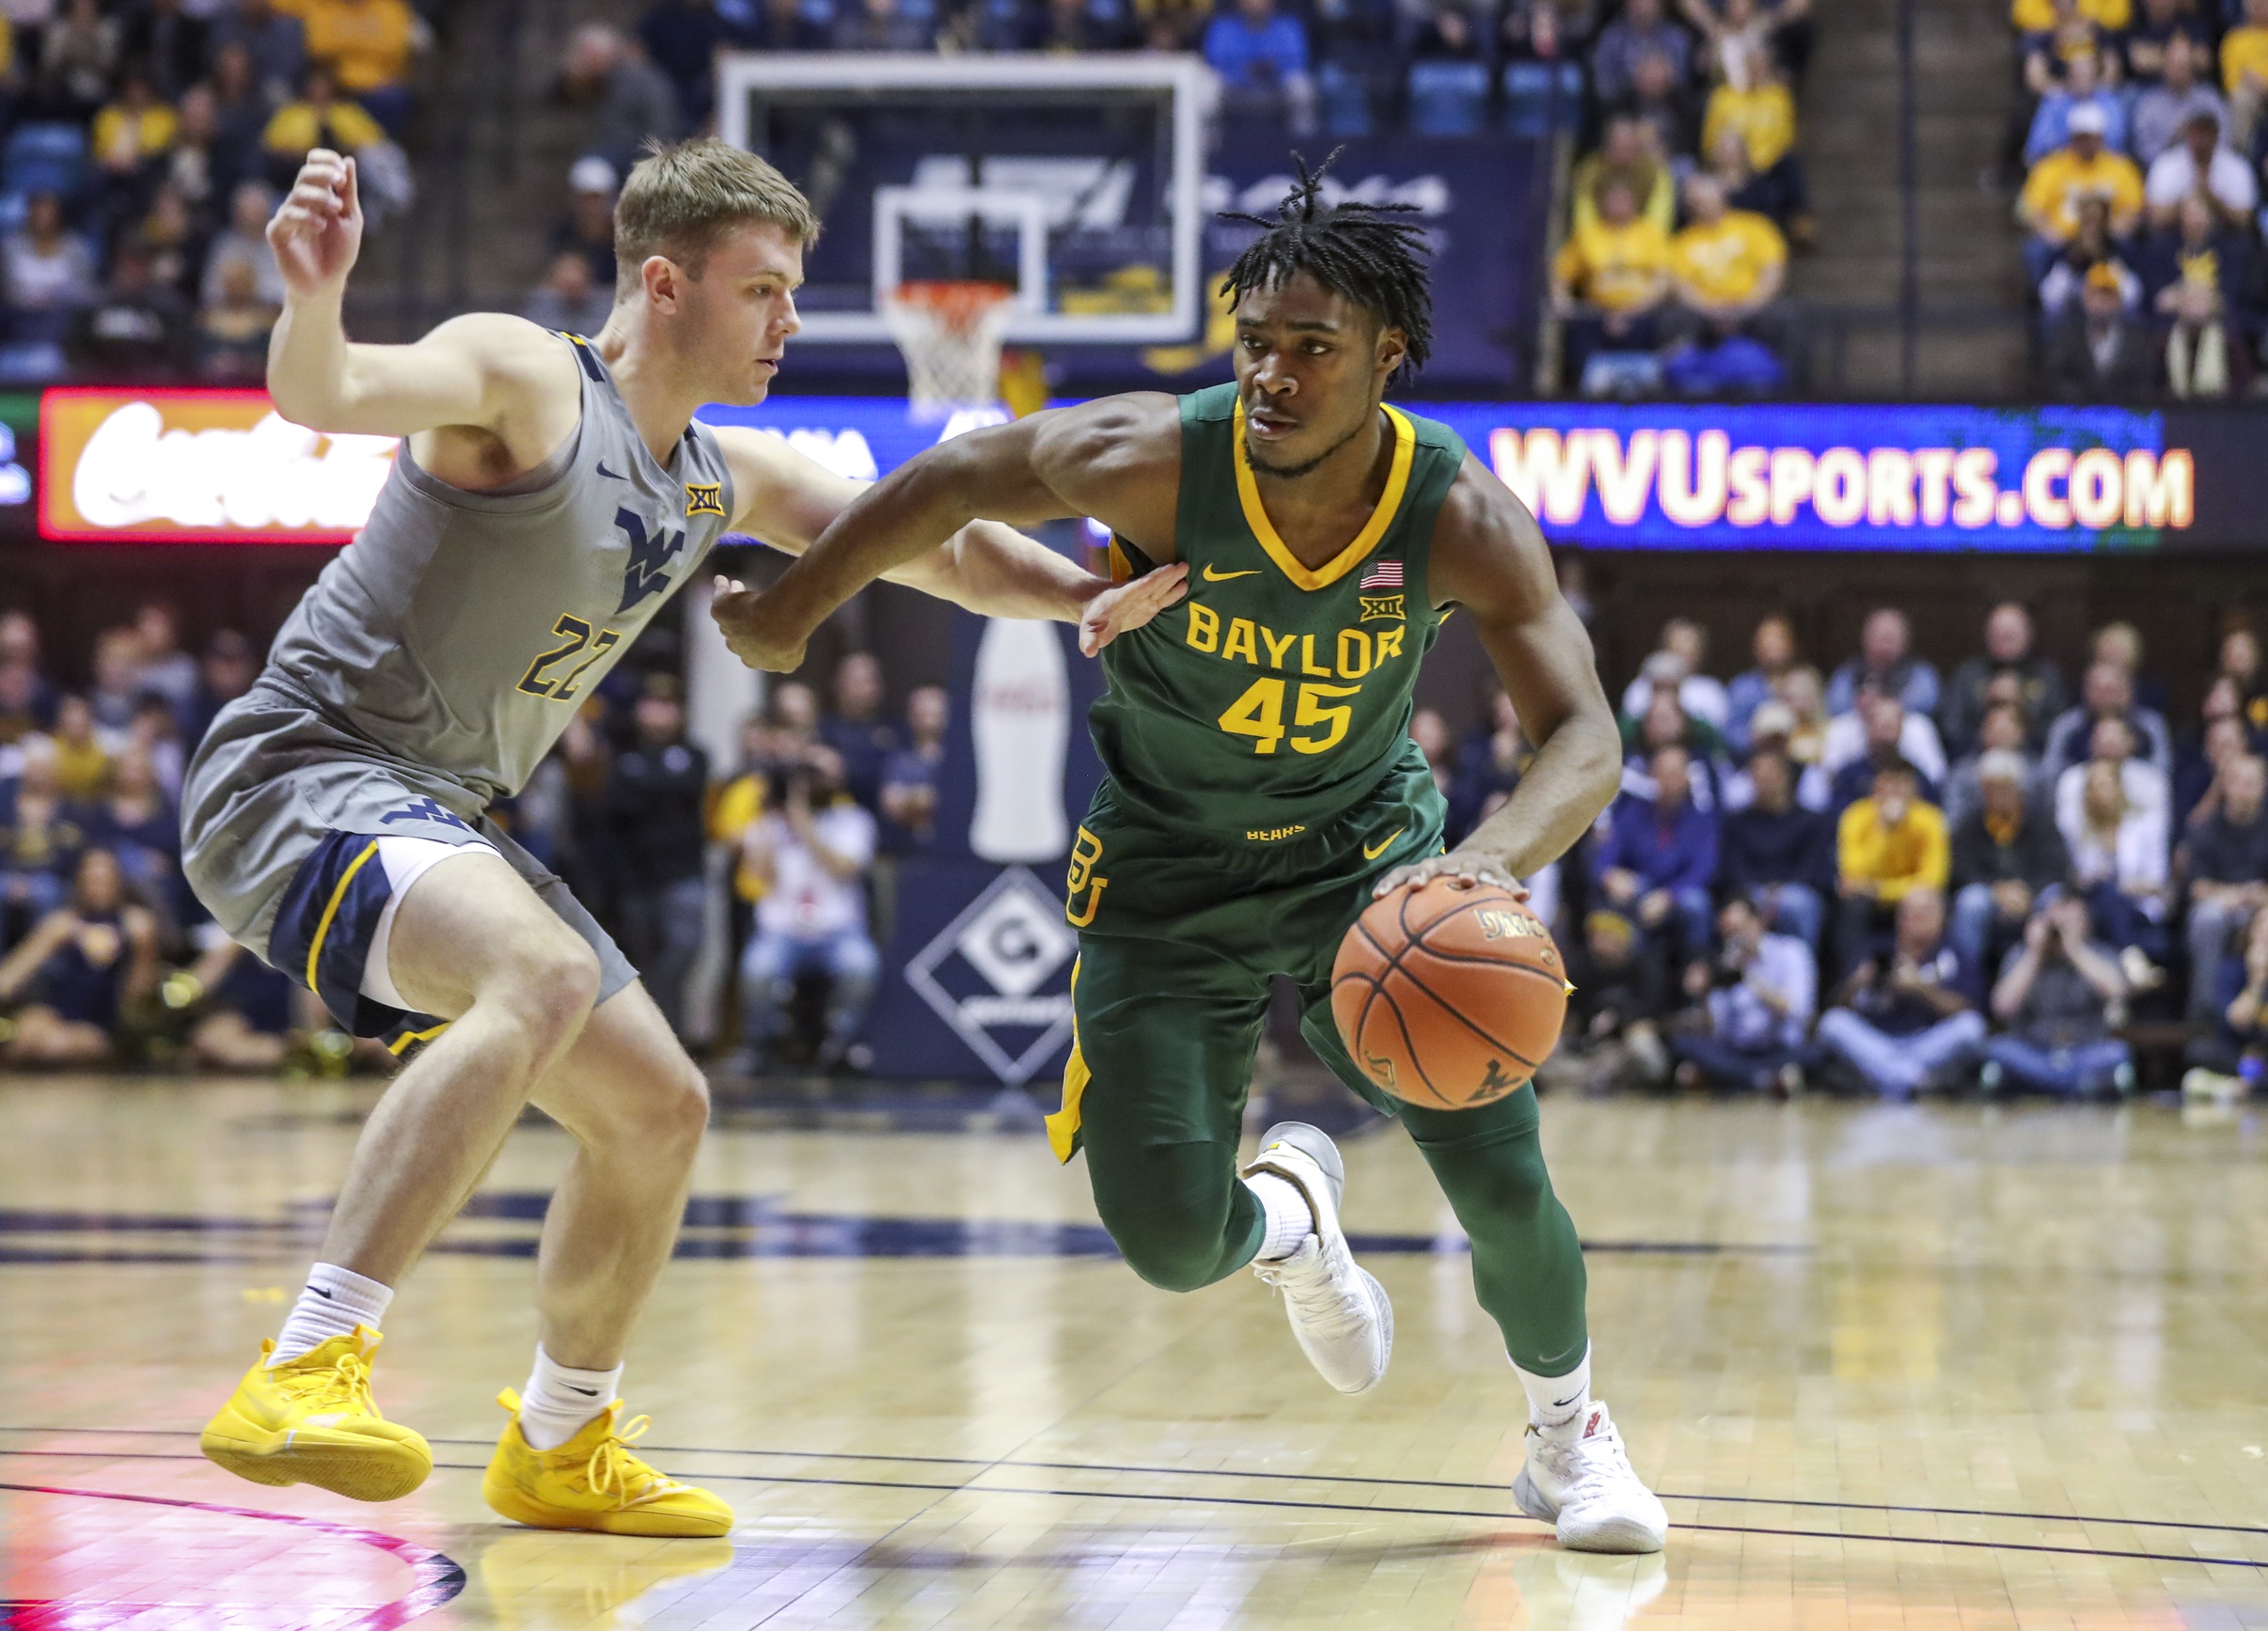 How to Watch, Listen, & Receive LIVE Updates of WVU vs Baylor Sports